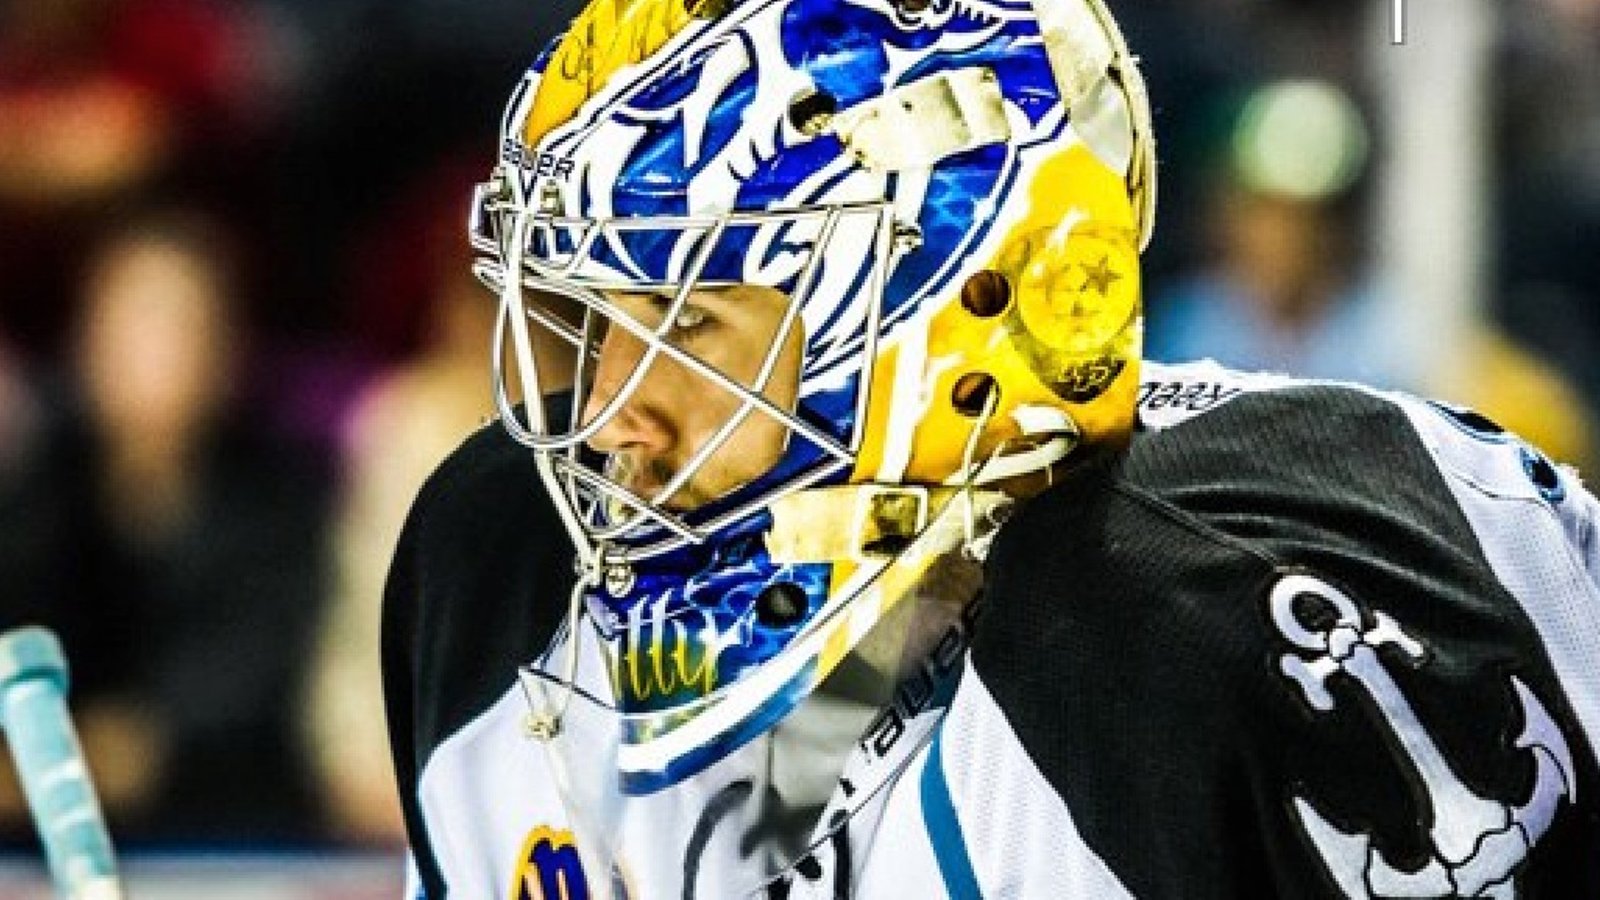 NHL team finally gifts goaltender first start after nearly a decade of waiting.